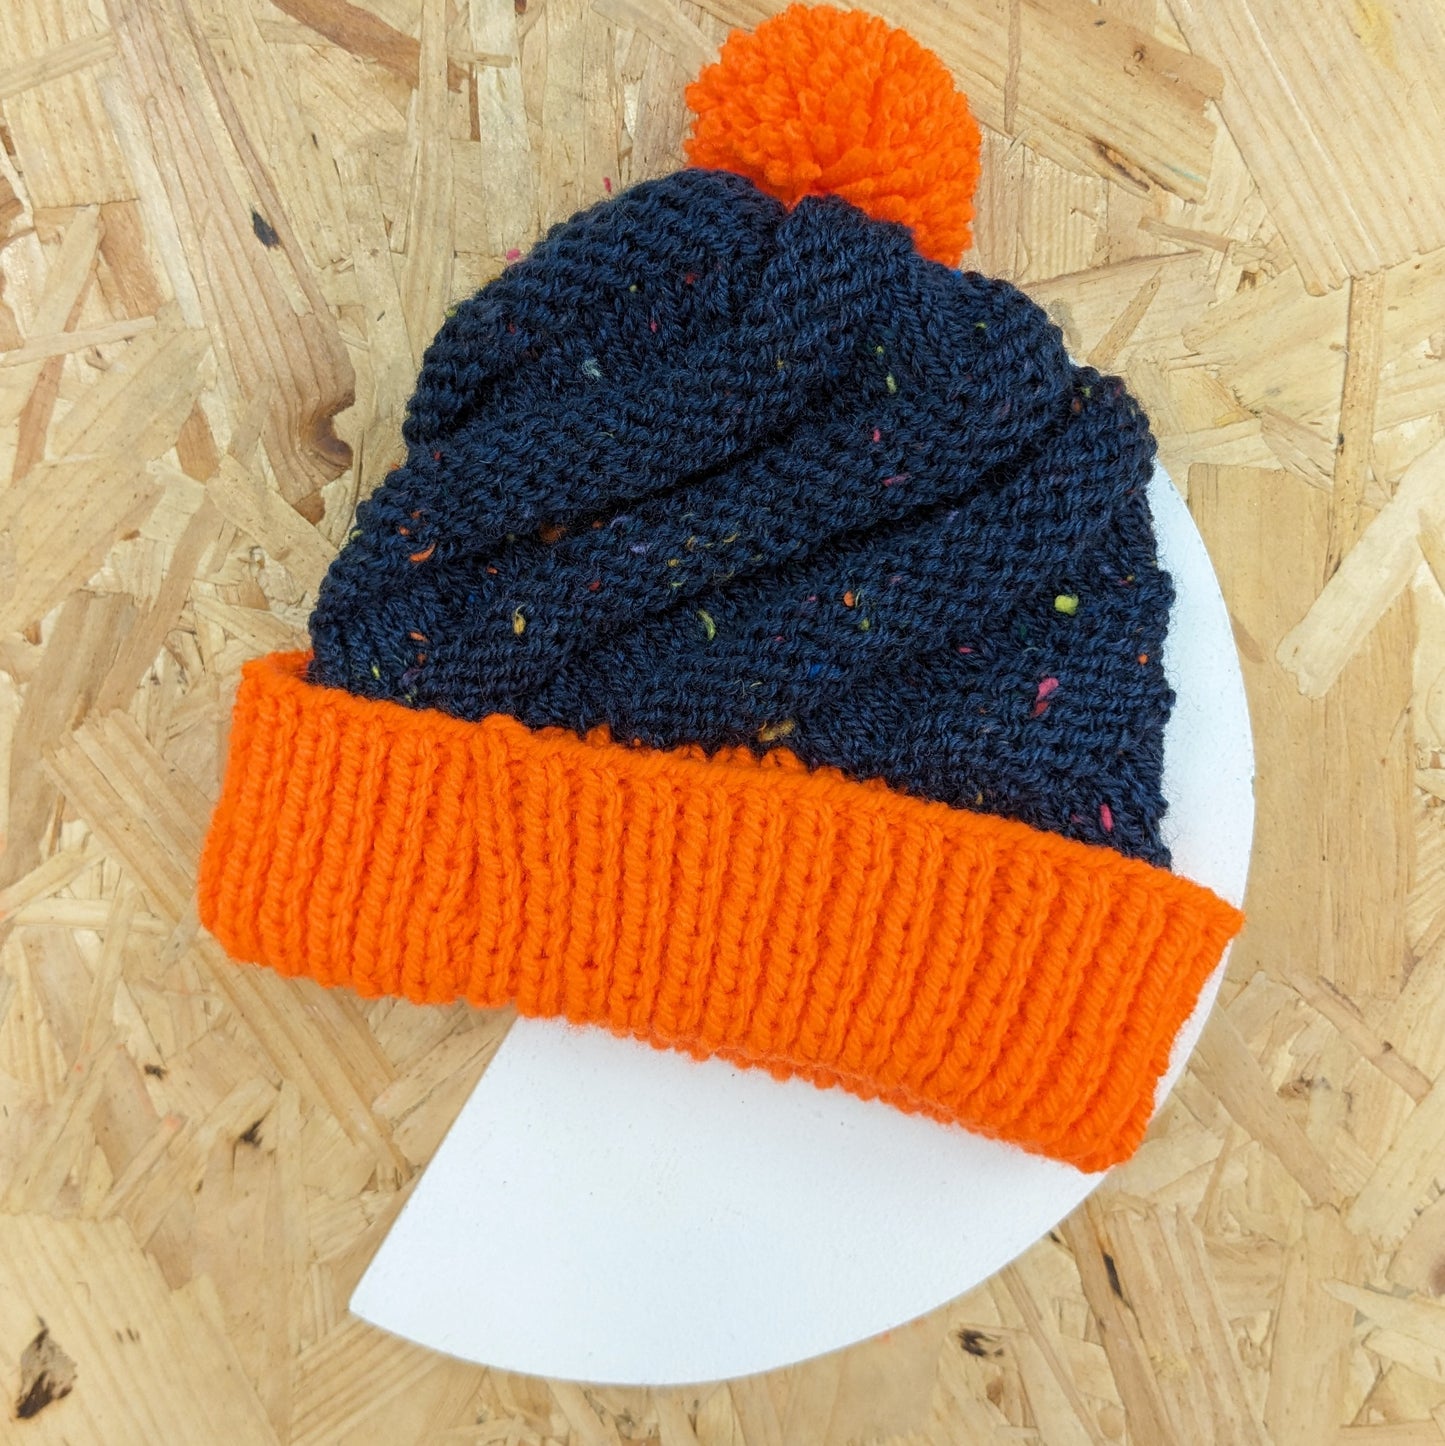 Knitted baby hats with pom pom